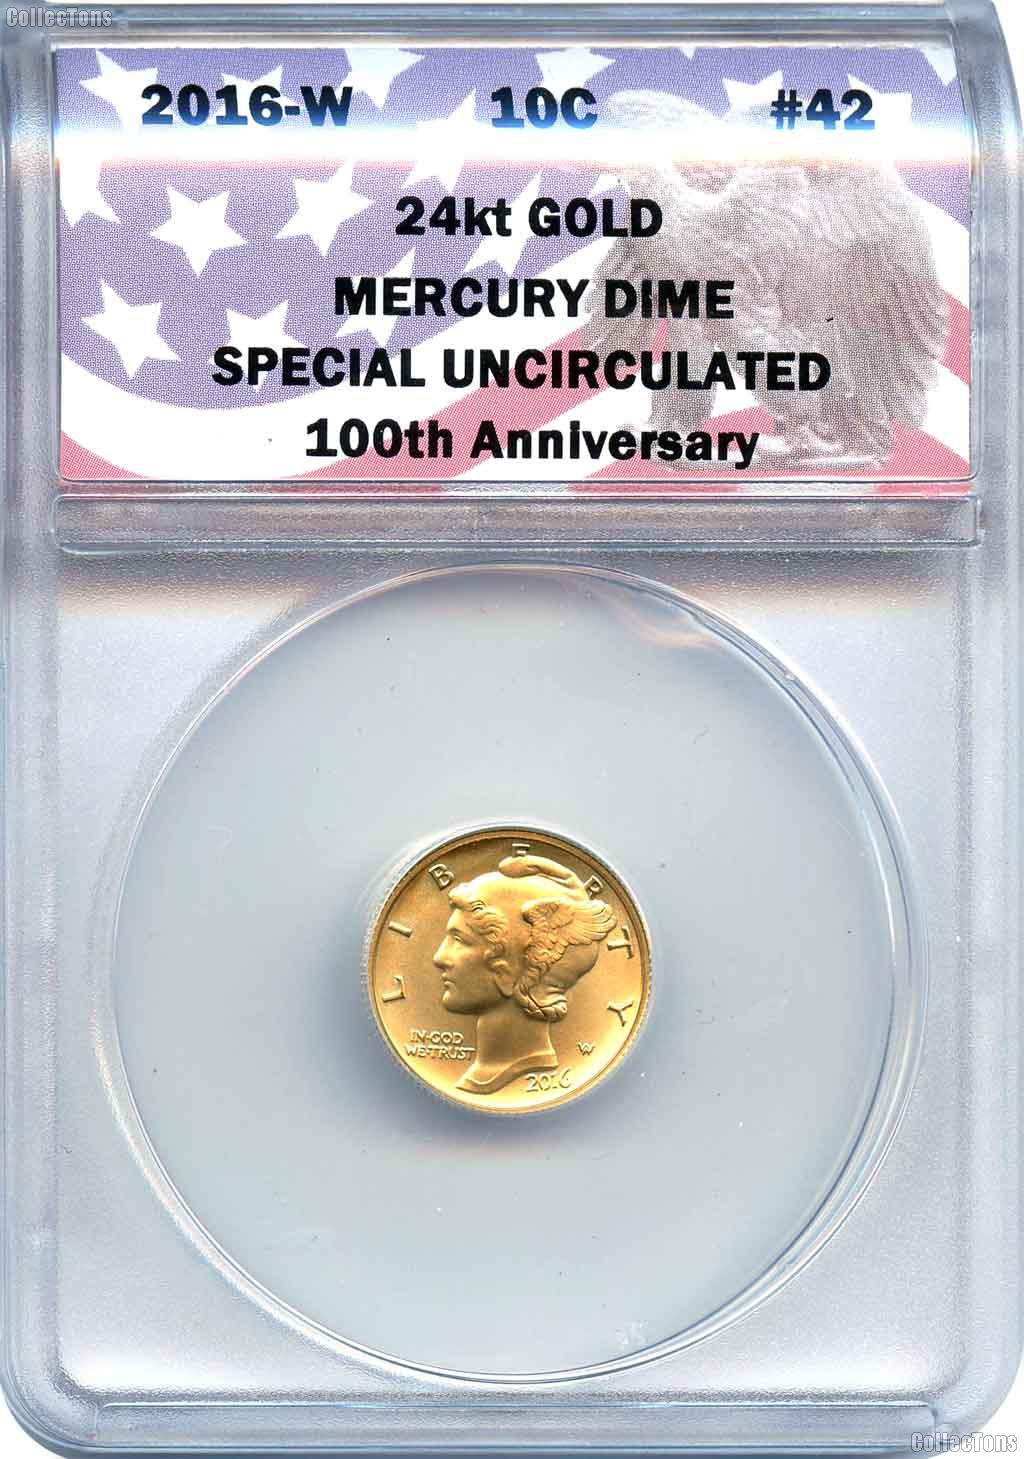 CollecTons Keepers #42: 2016-W Gold Mercury Dime Certified in Exclusive ANACS Special Uncirculated Holder